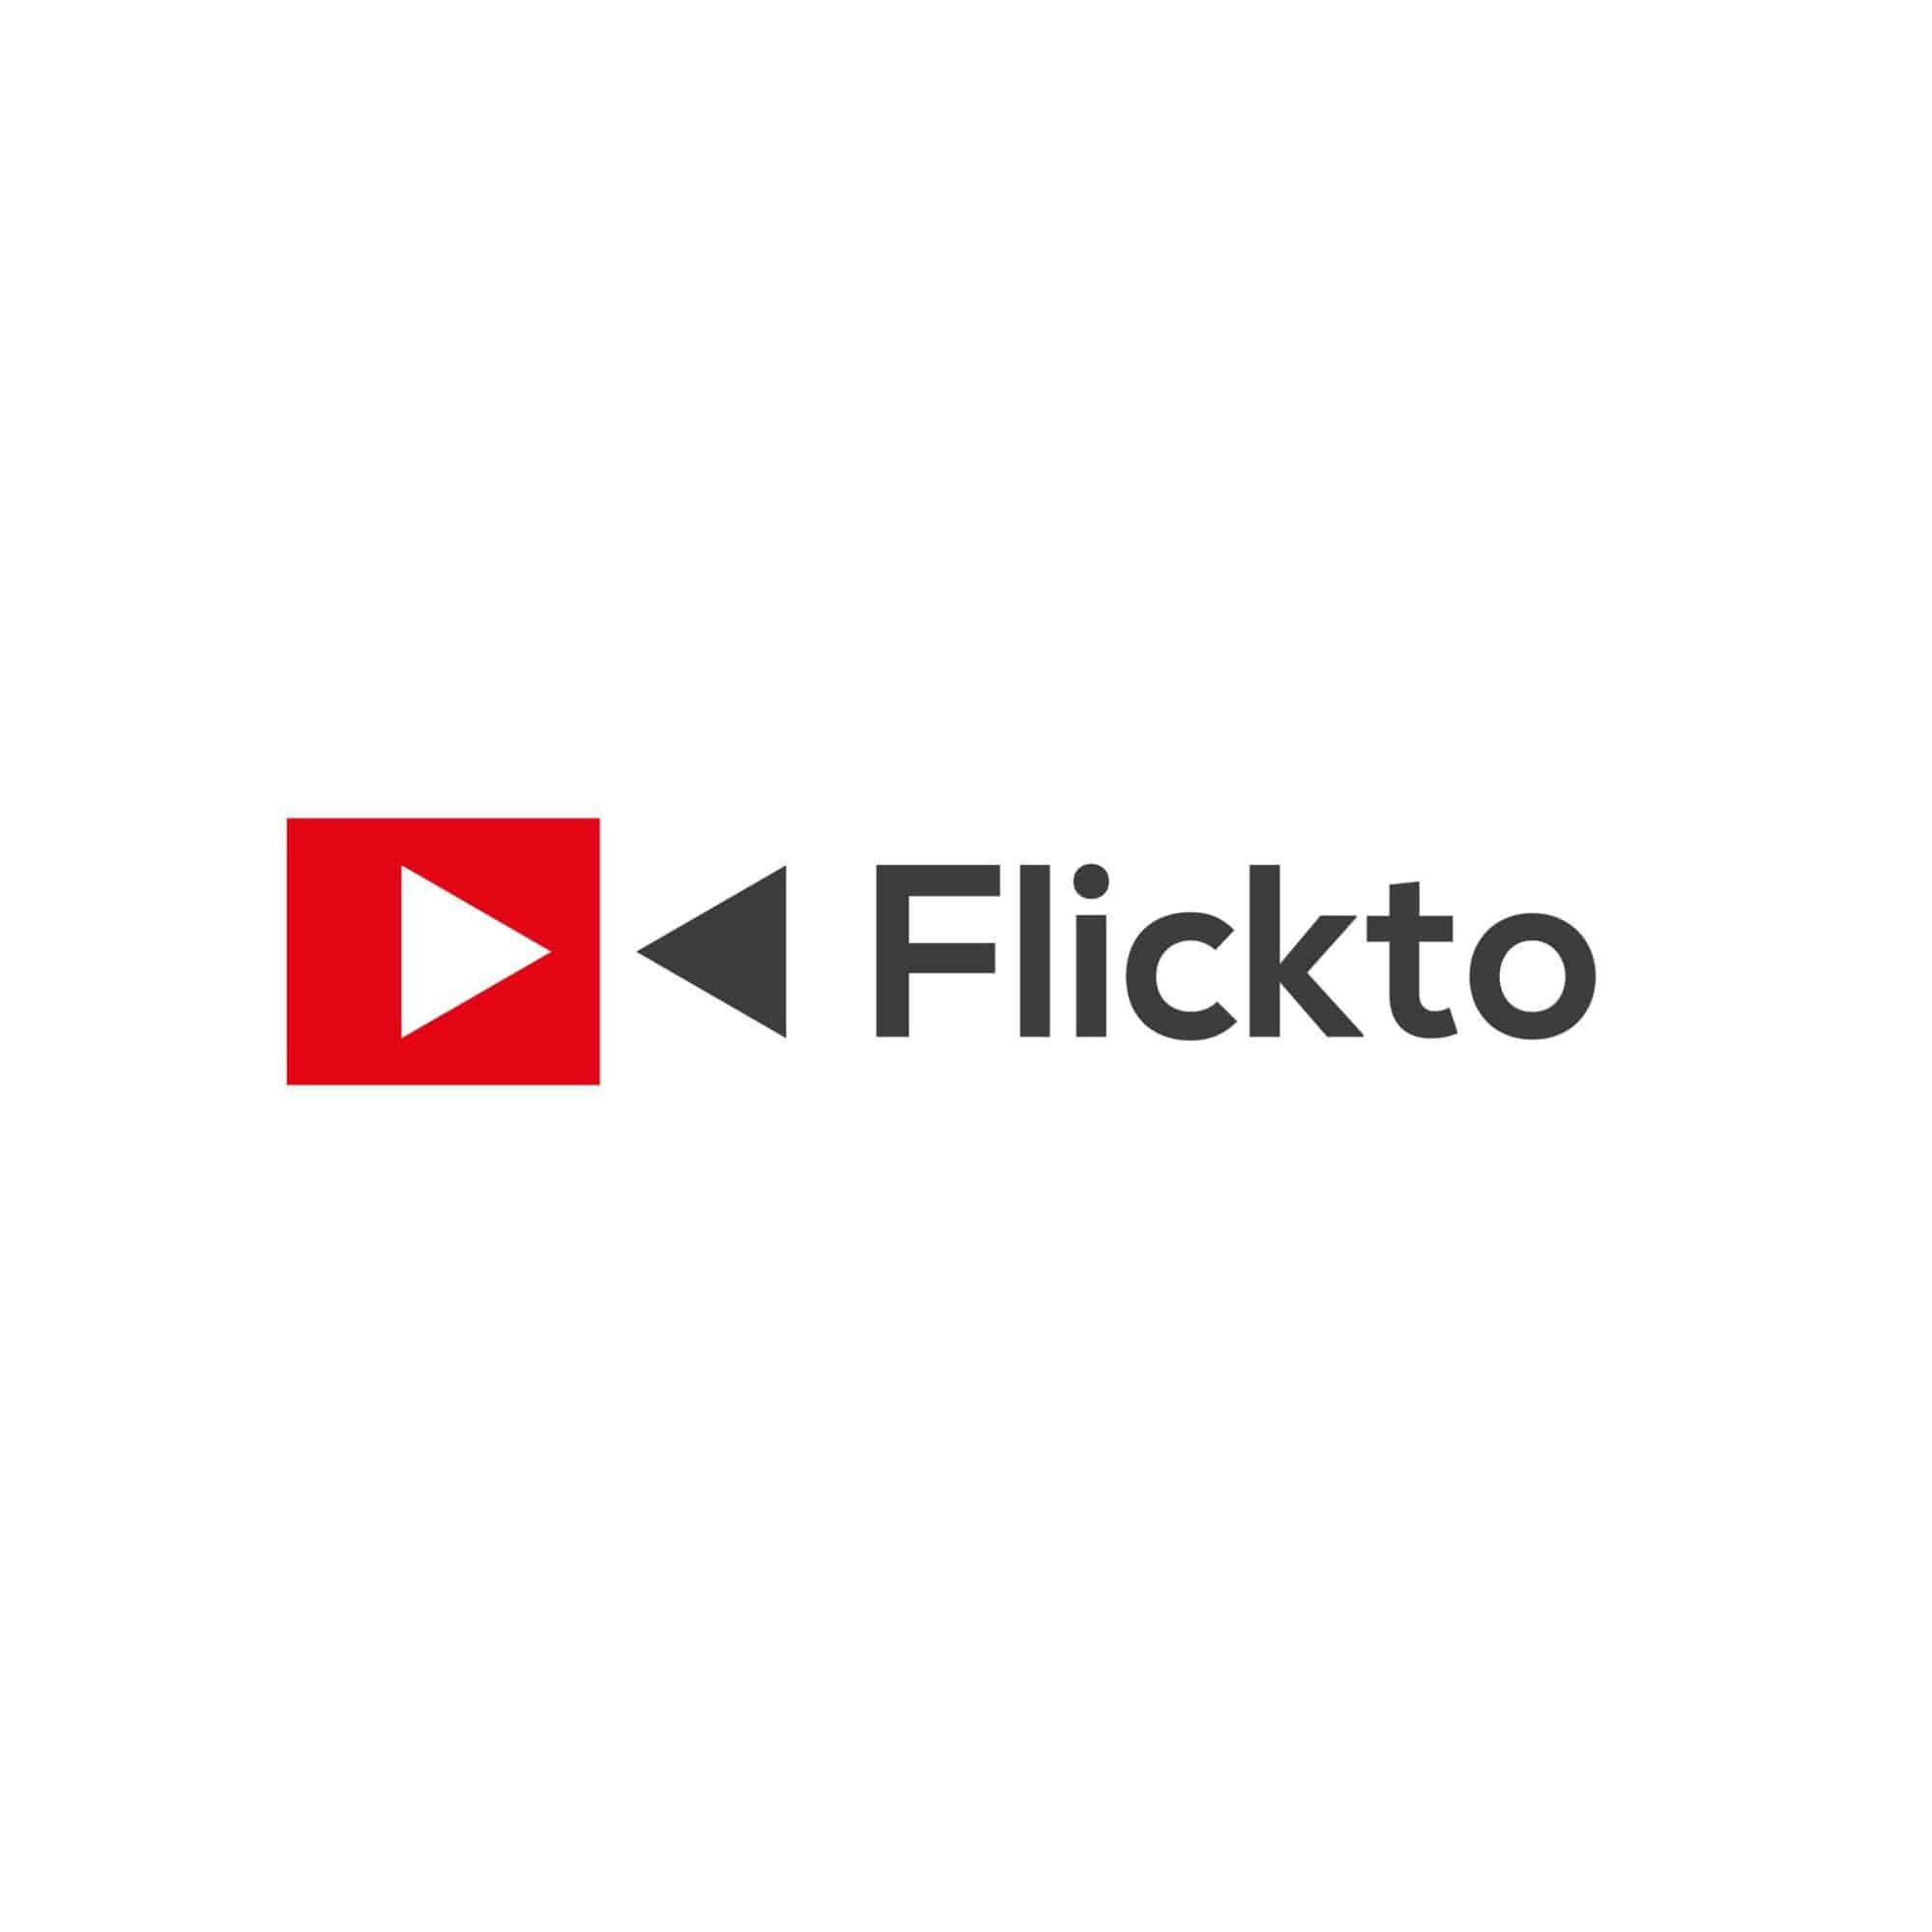 Flickto IDO Smashing Records, Initial Target of $350k Reached in 2 Hours - 1